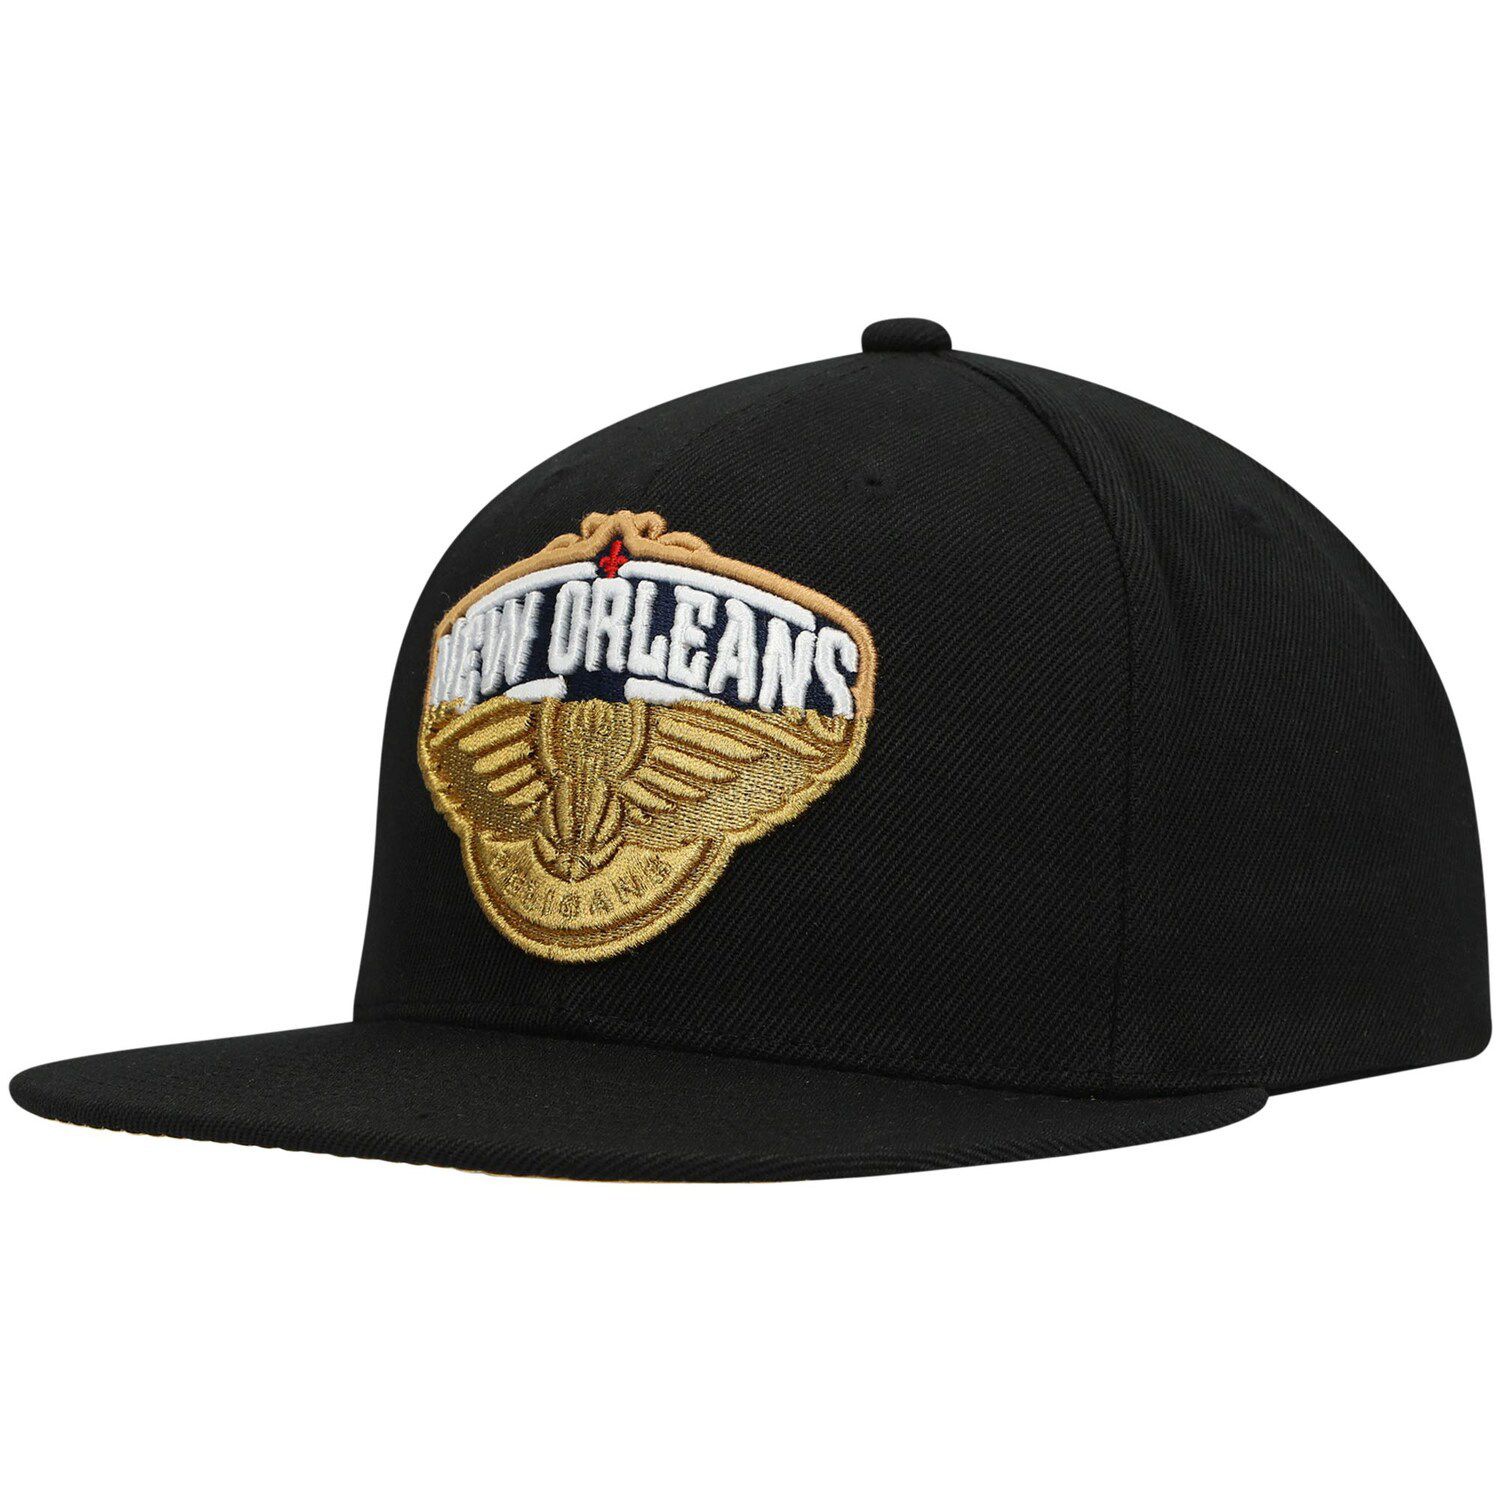 Image for Unbranded Men's Mitchell & Ness Black New Orleans Pelicans Gold Dip Down Snapback Hat at Kohl's.